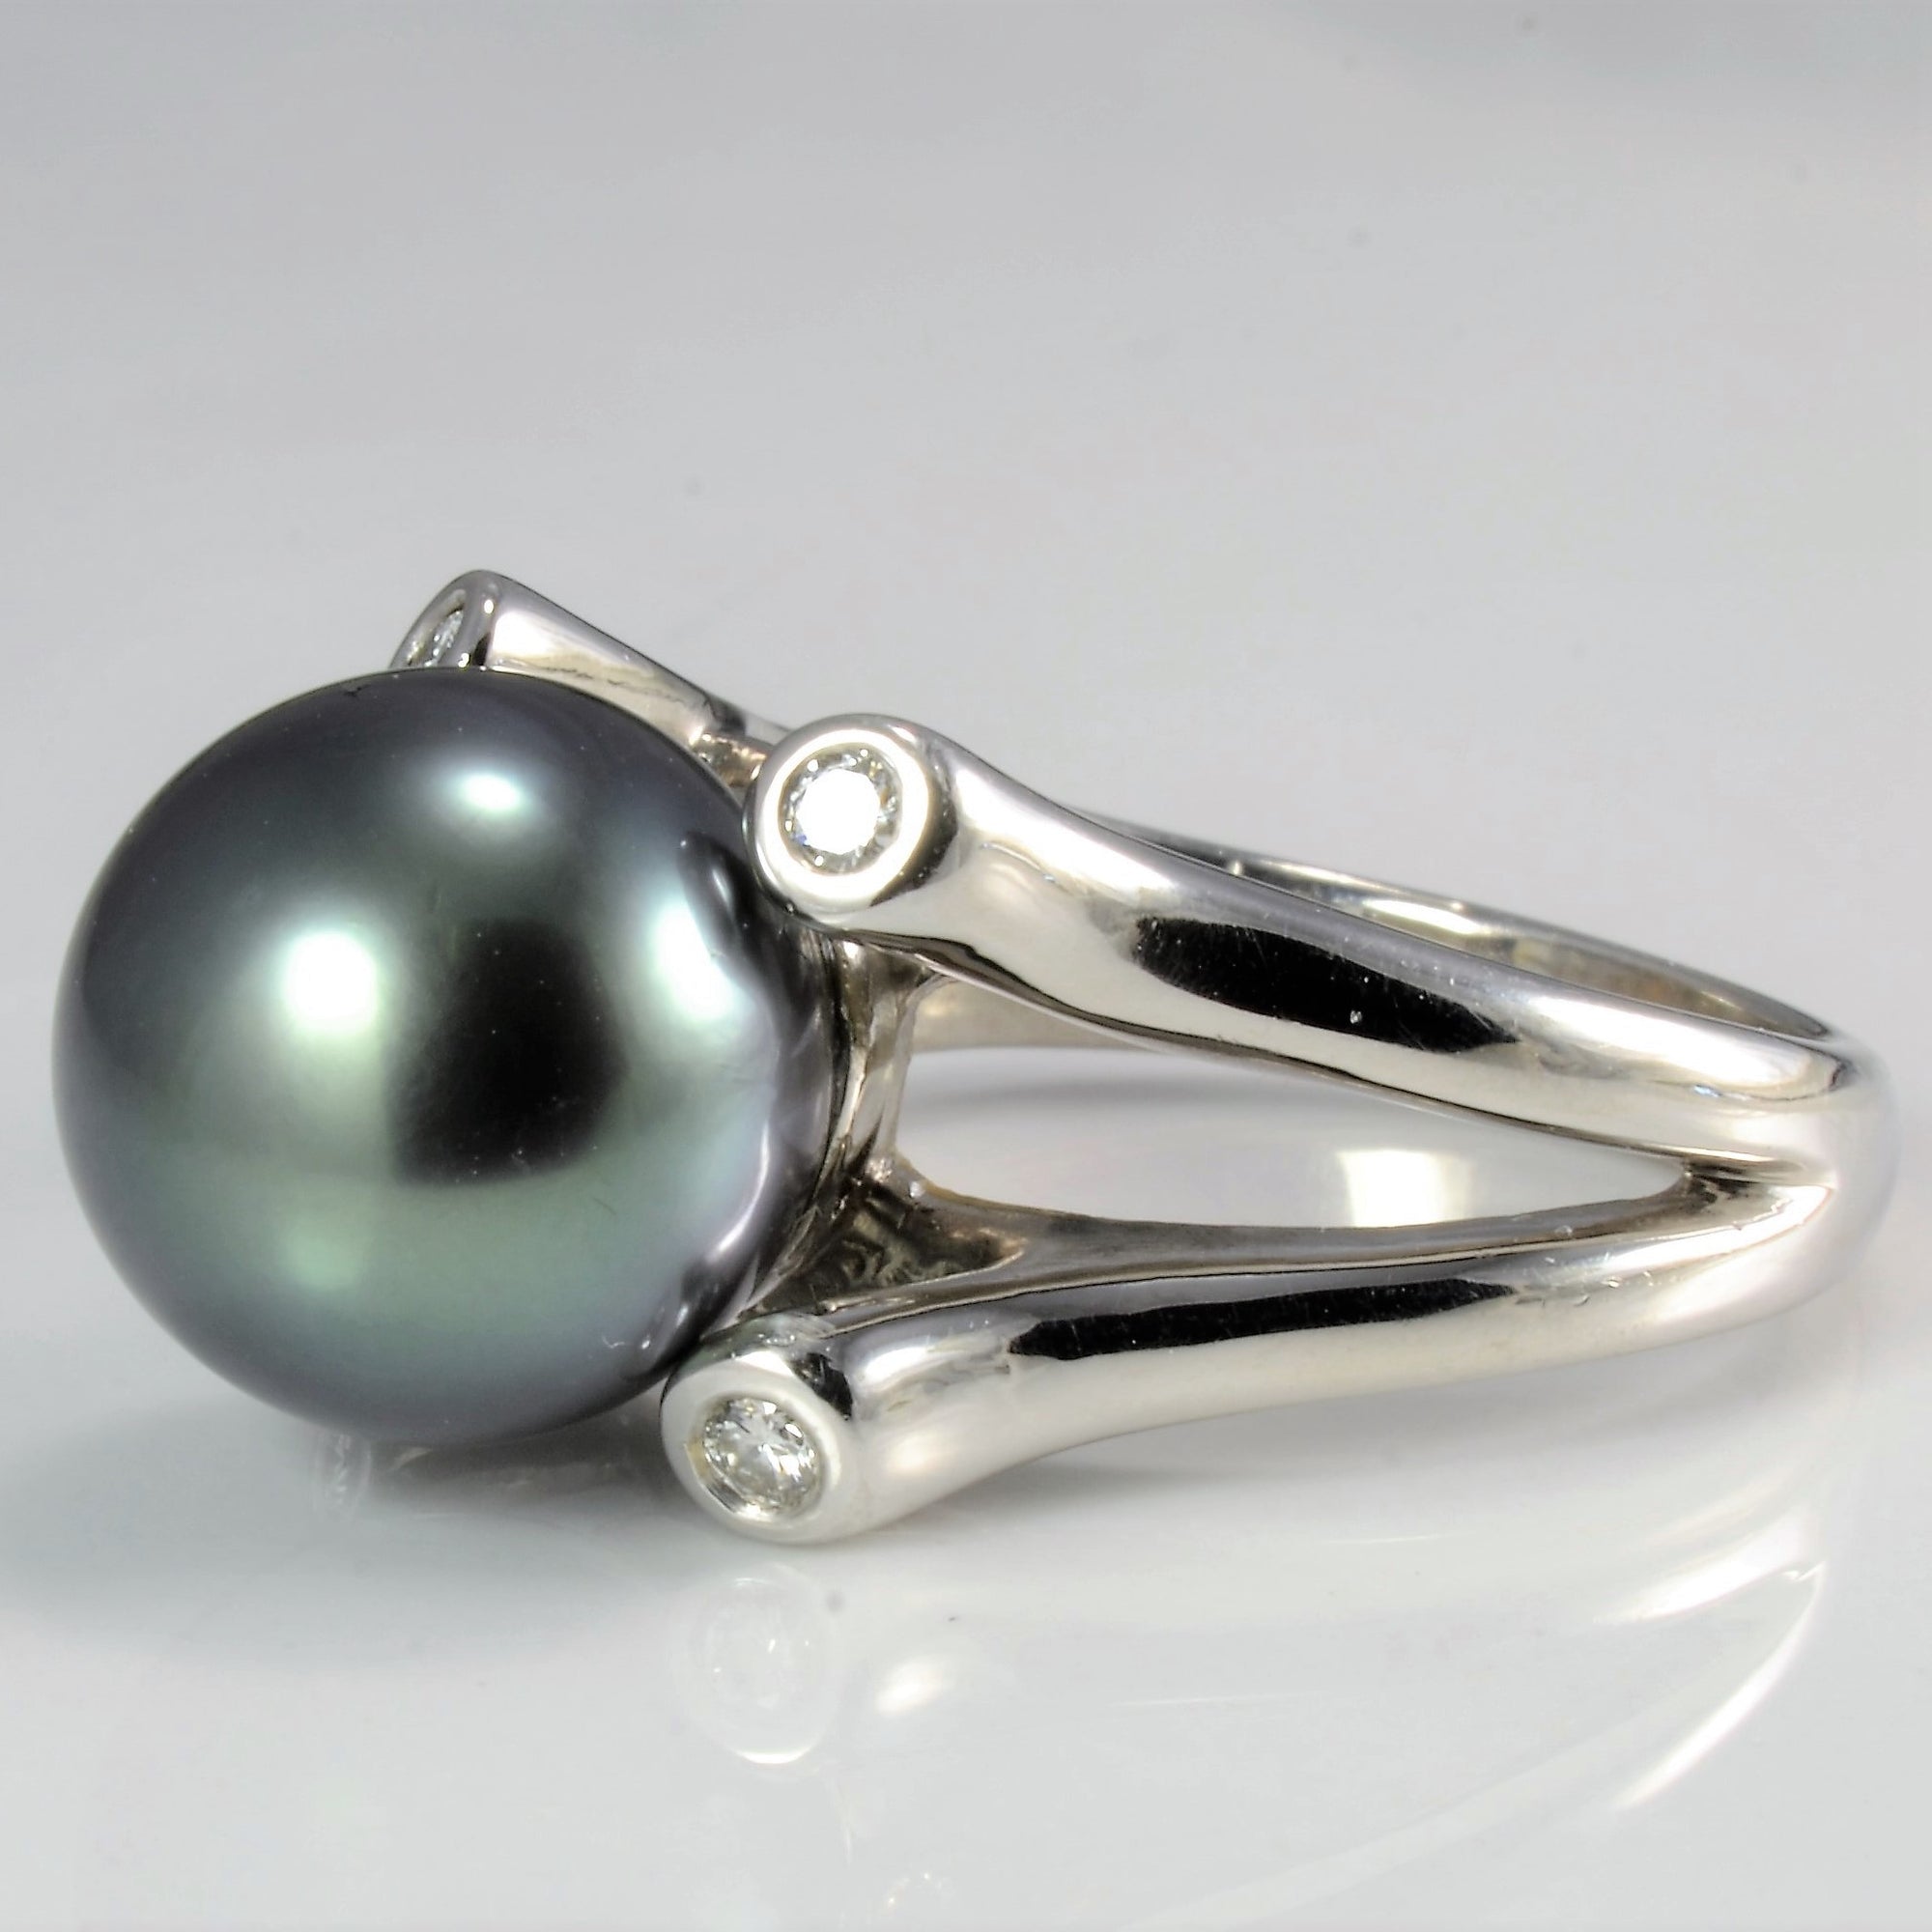 Solitaire Pearl & Diamond Accents Ladies Ring | 0.12 ctw, SZ 7.25 |